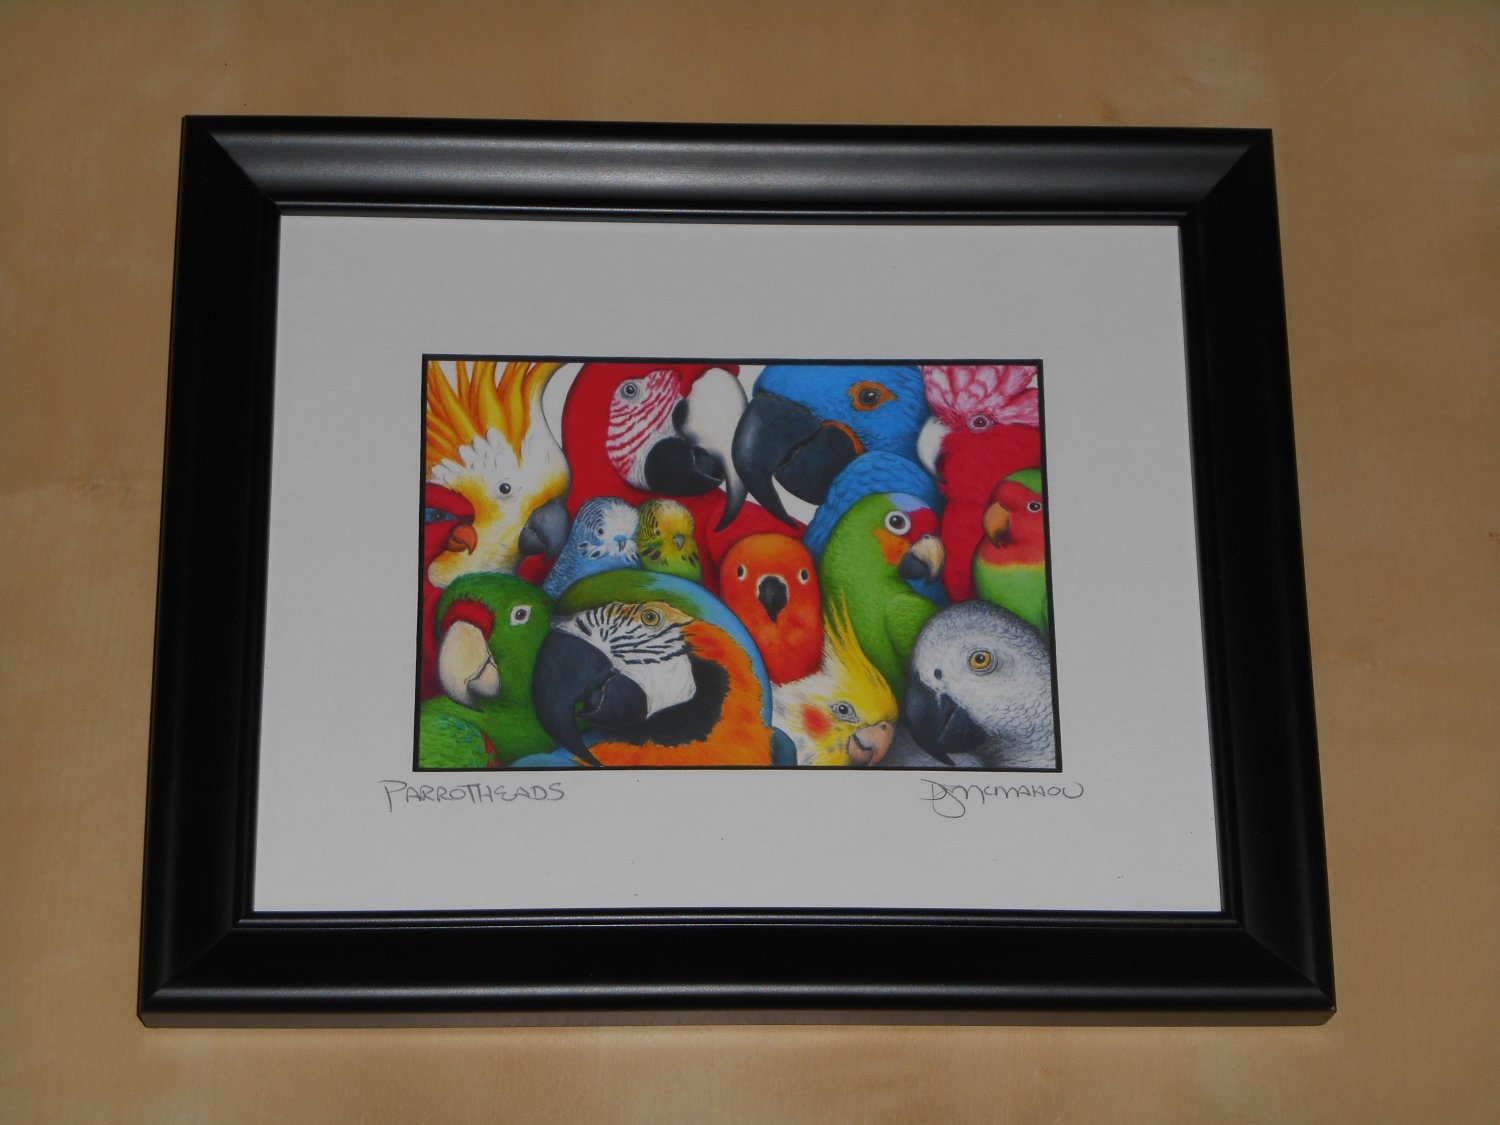 Parrotheads Parrot Heads Don McMahon Digital Reproduction Print Birds on Things Hand Signed